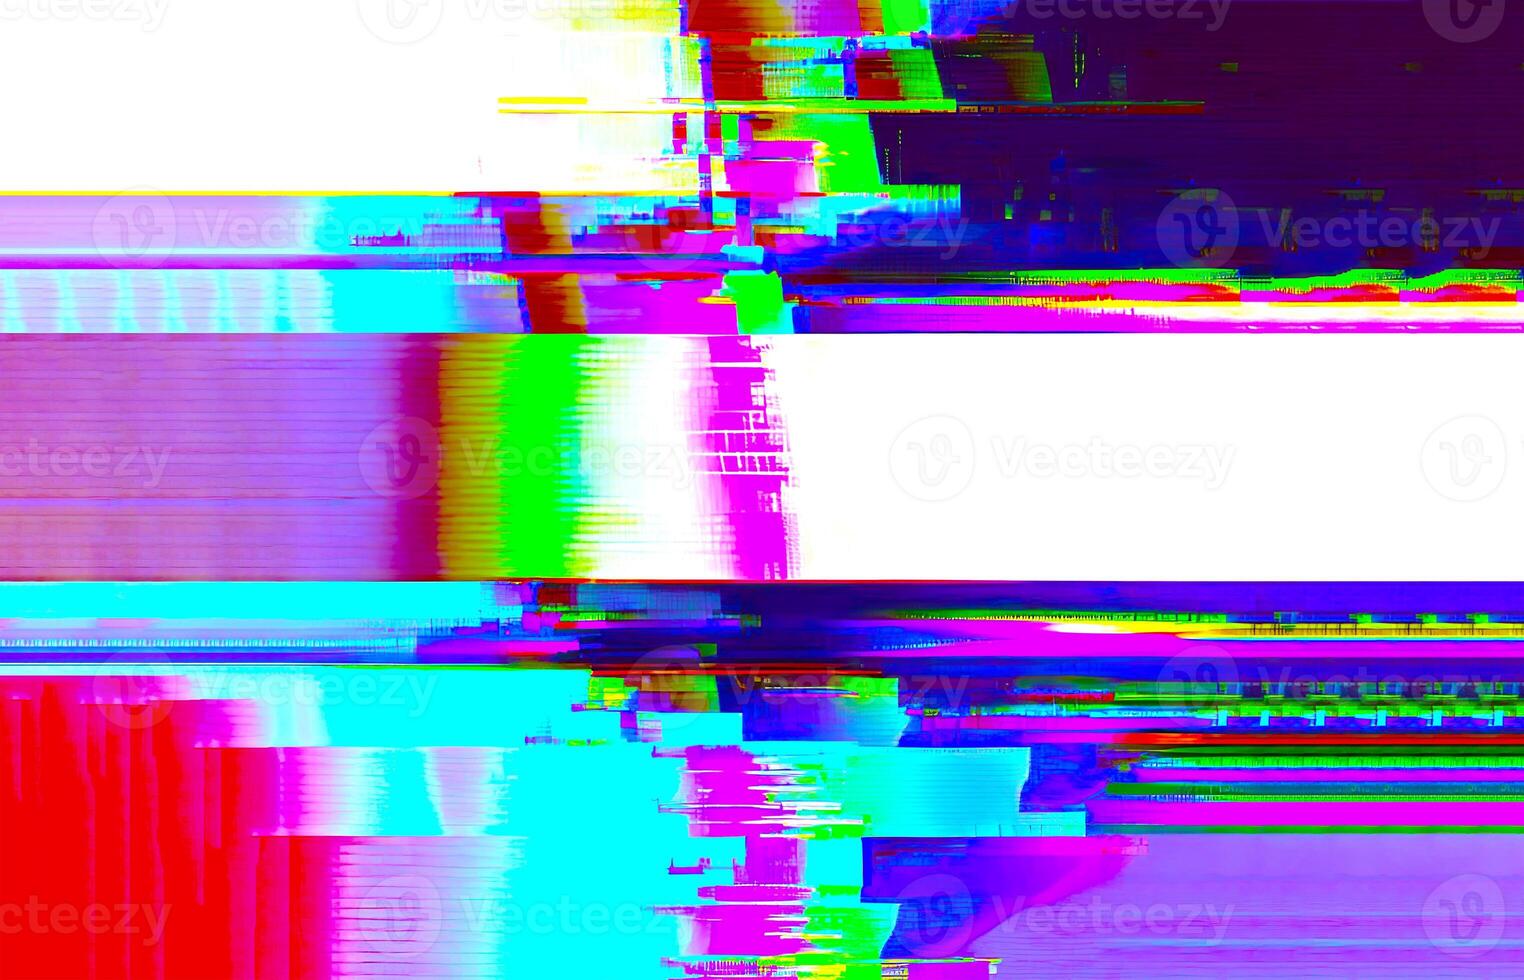 High-Tech Broken Screen Glitchy Effect in Vibrant Colors for Digital Art and Design Projects, photo